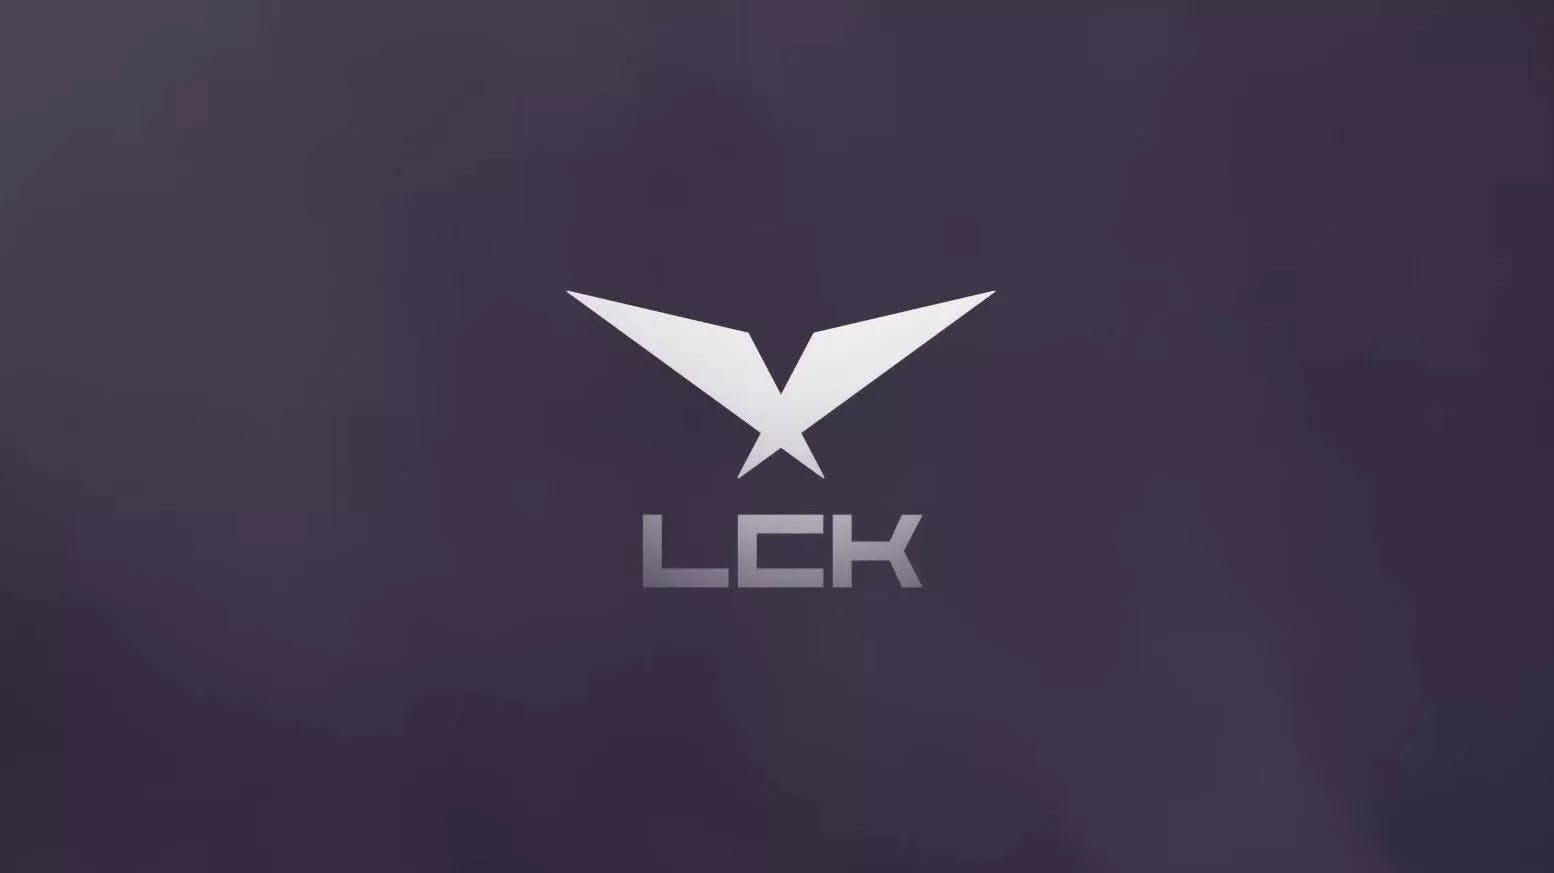 LCK resorts to pre-recorded games for Week 6 after returning DDoS attacks